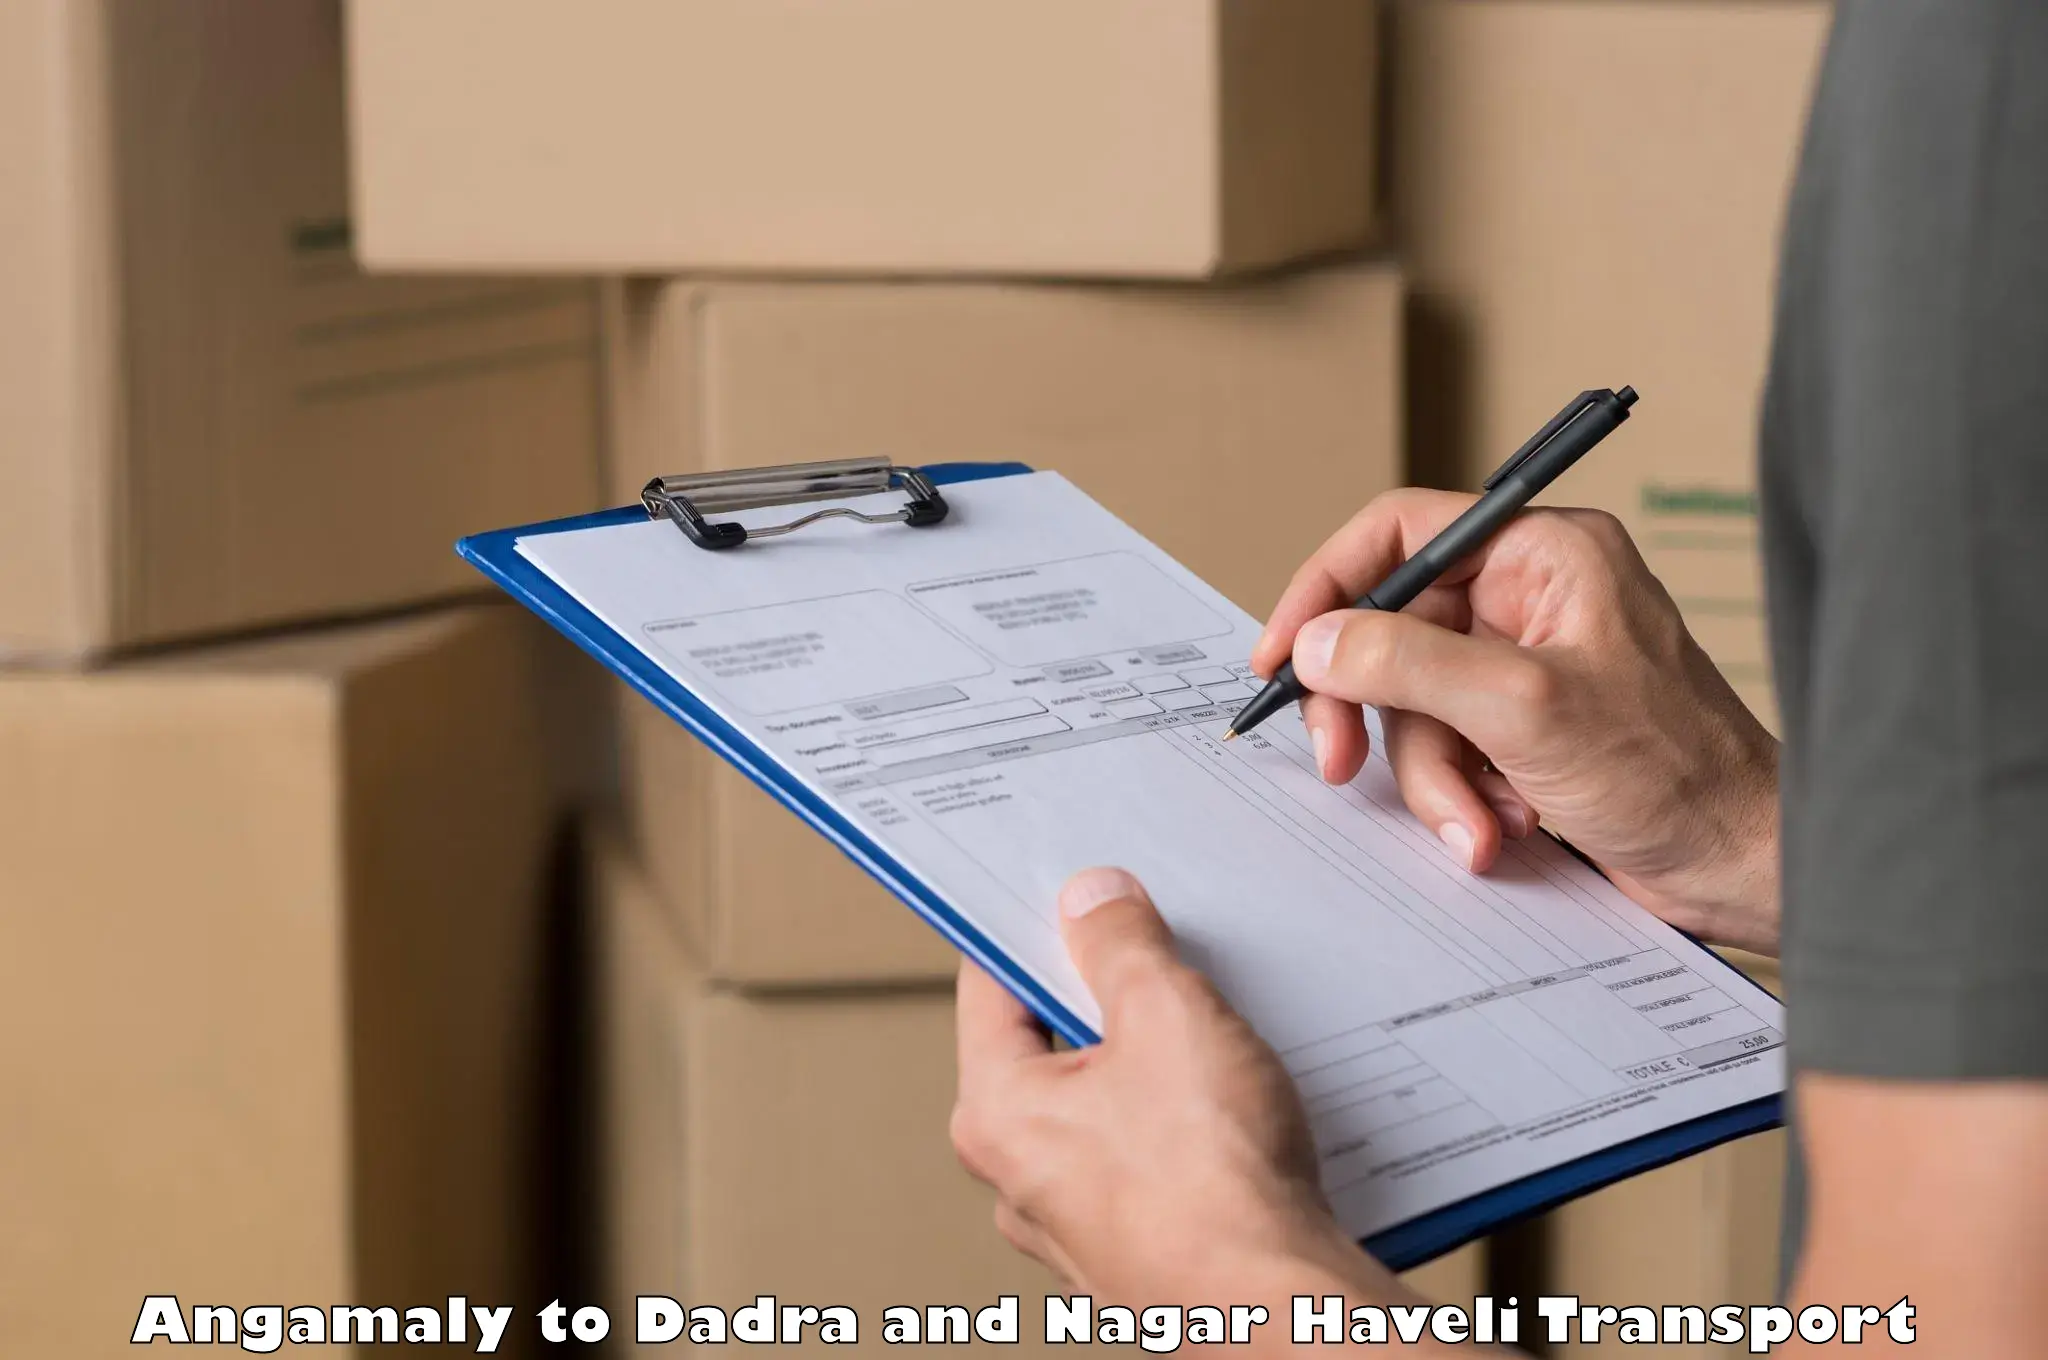 Truck transport companies in India Angamaly to Dadra and Nagar Haveli